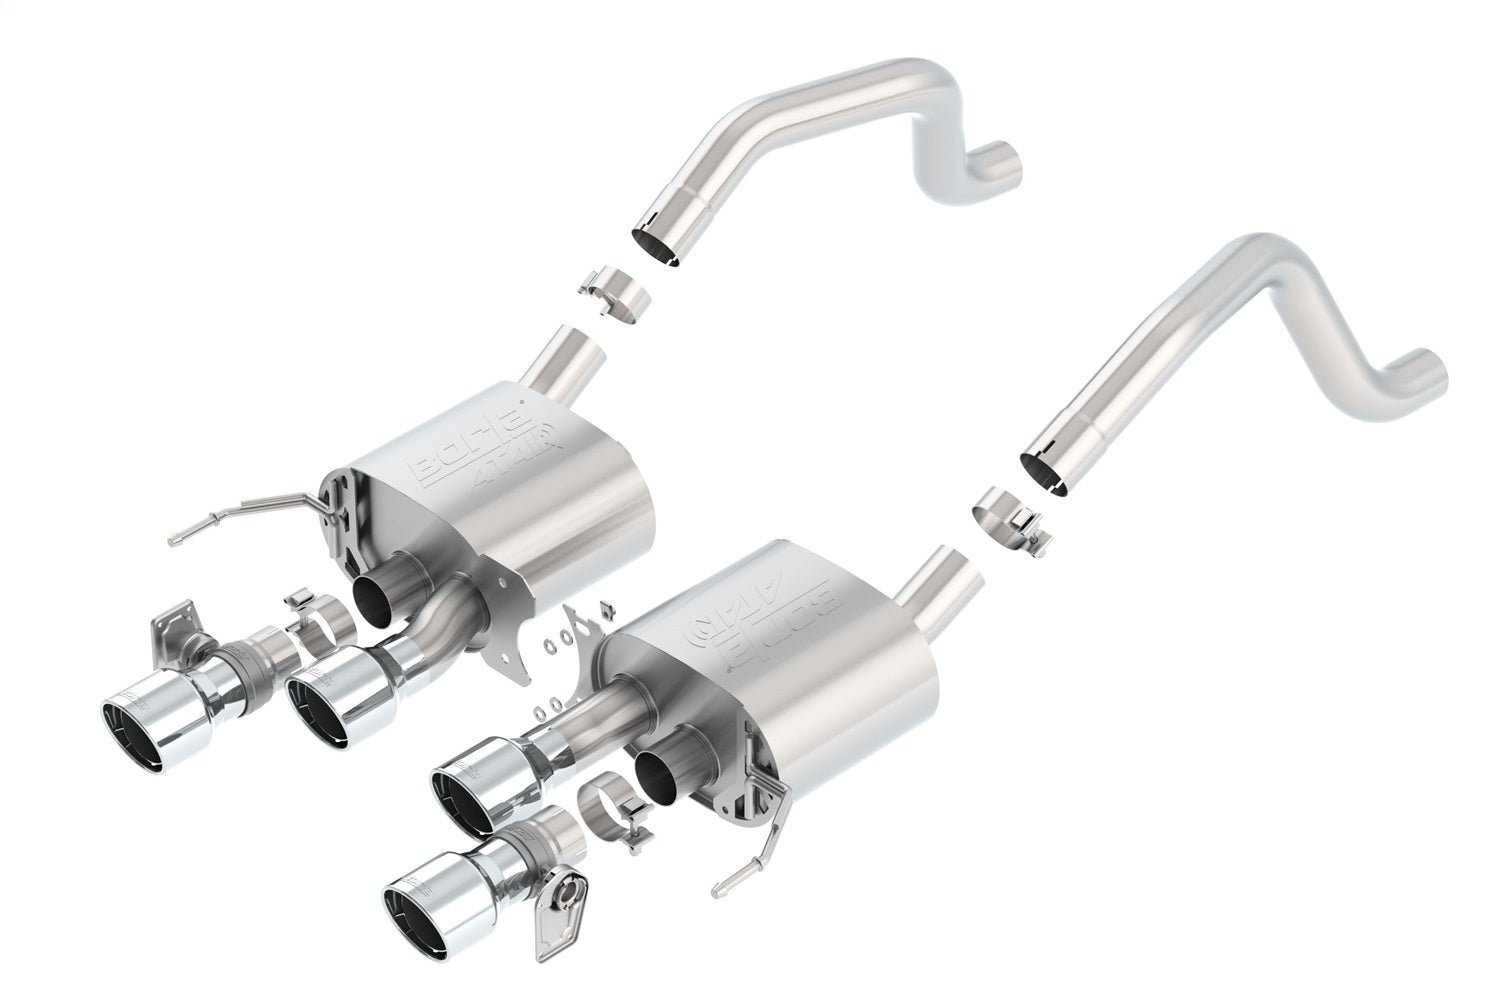 Axle-Back Exhaust System - ATAK(r)